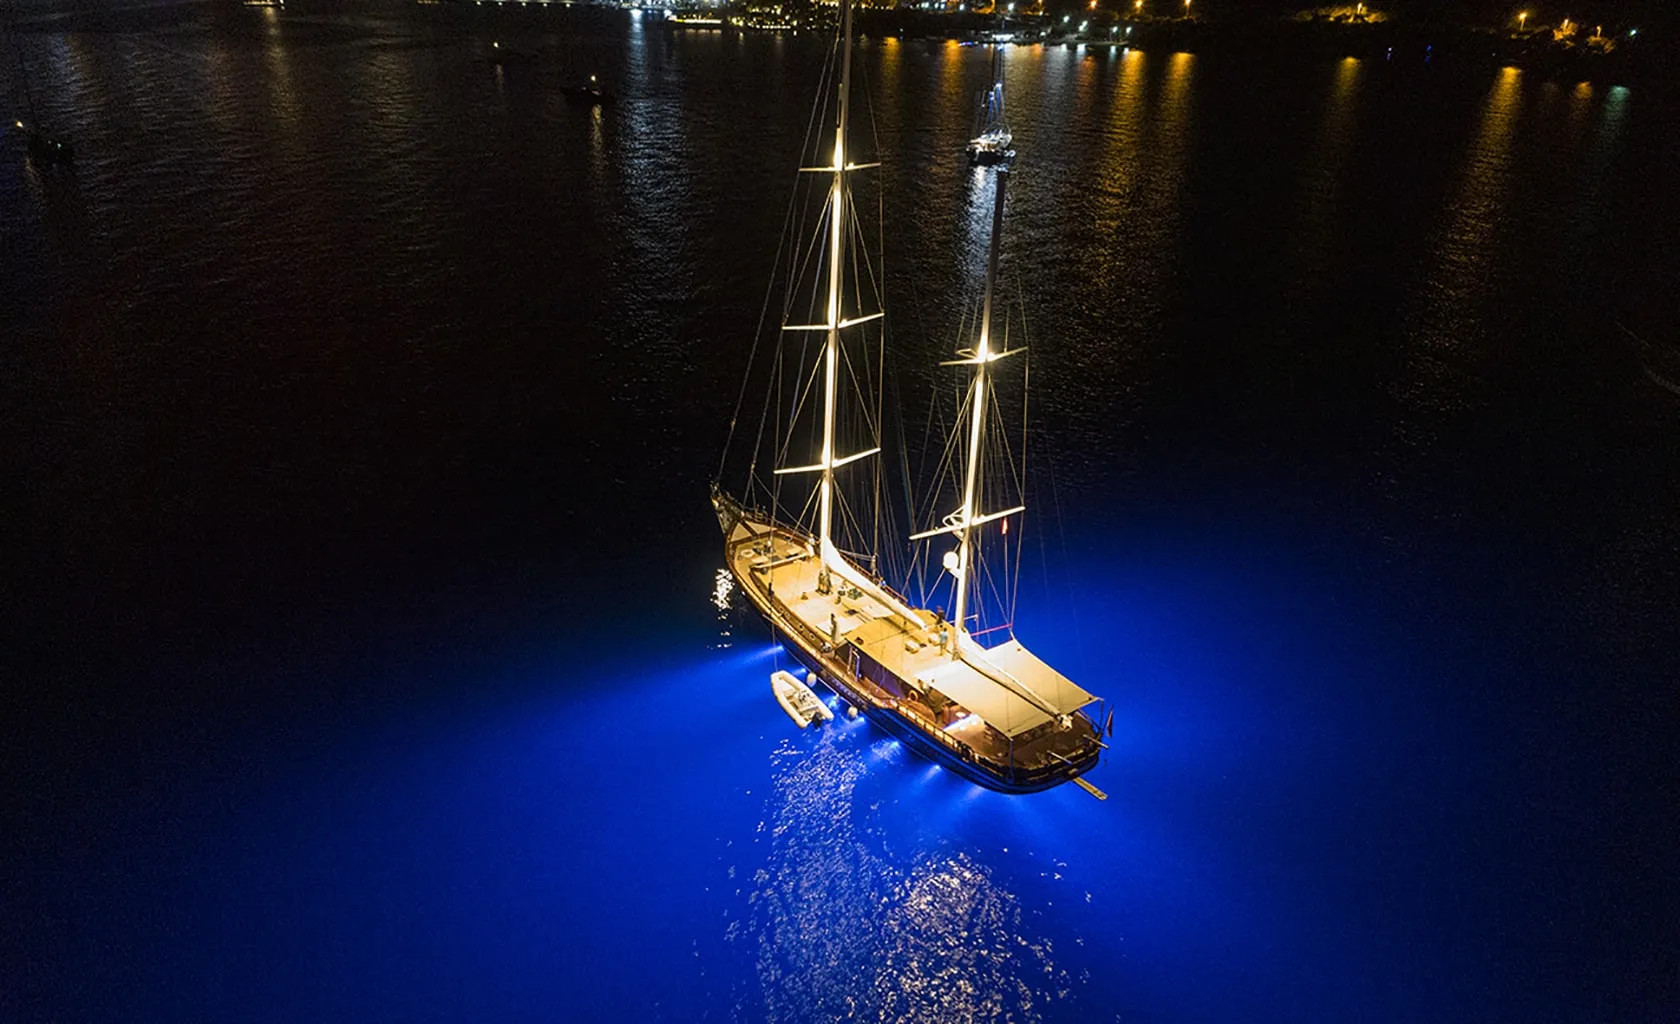 QUEEN OF DATCA At night